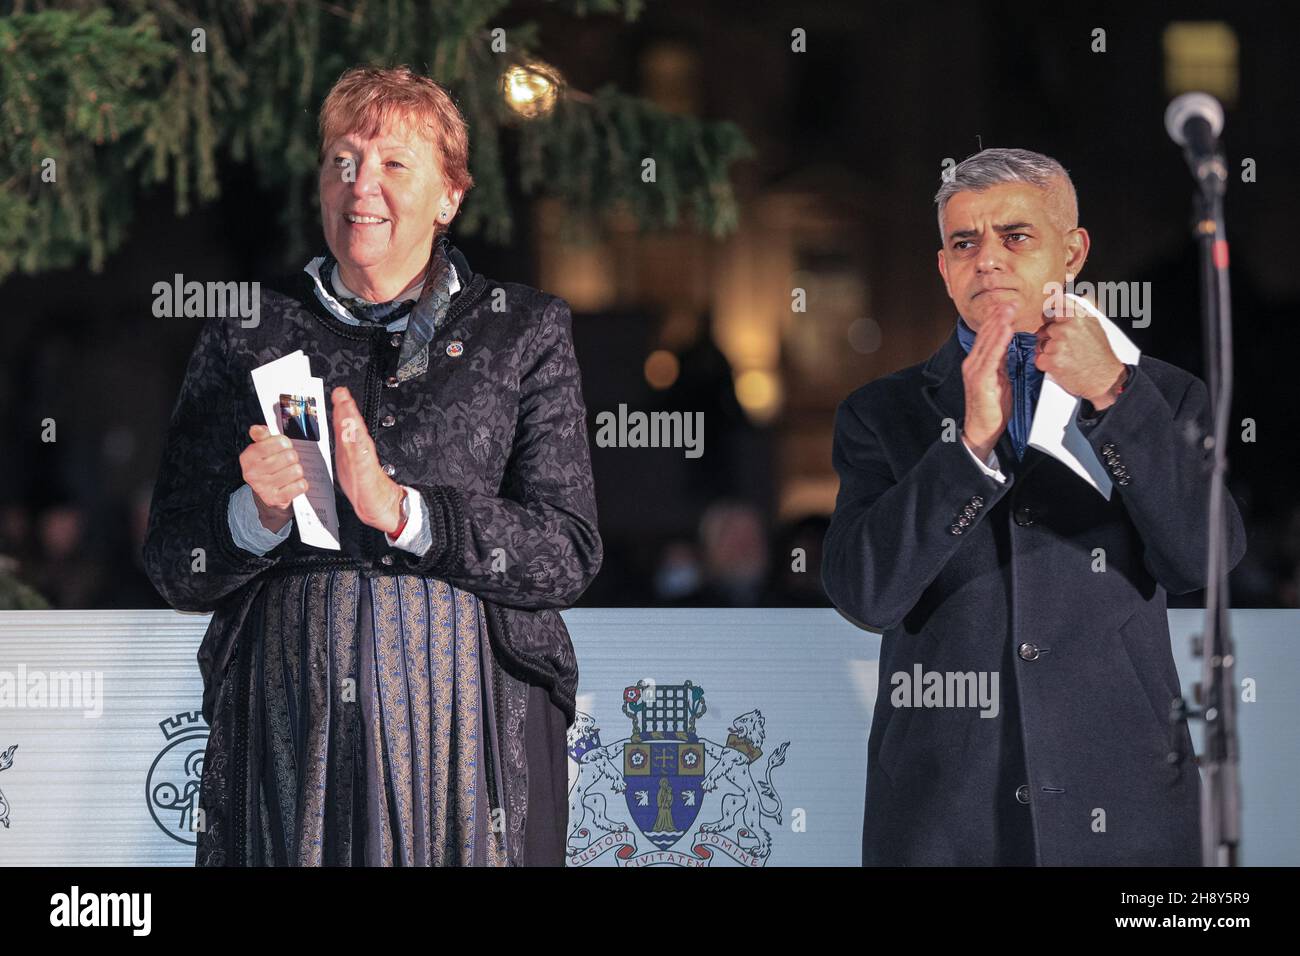 Westminster, London, 02nd Dec 2021. The Mayor of Oslo, Marianne Borgen, and Mayor of London, Sadiq Khan. The Trafalgar Square Christmas Tree lights are switched on in a traditional ceremony this evening. The 25-metre high tree, usually a Norwegian spruce, is a gift from the people of Norway to London, in thanks for Britain's support in World War II. This historic tradition has happened every year since 1947. Credit: Imageplotter/Alamy Live News Stock Photo